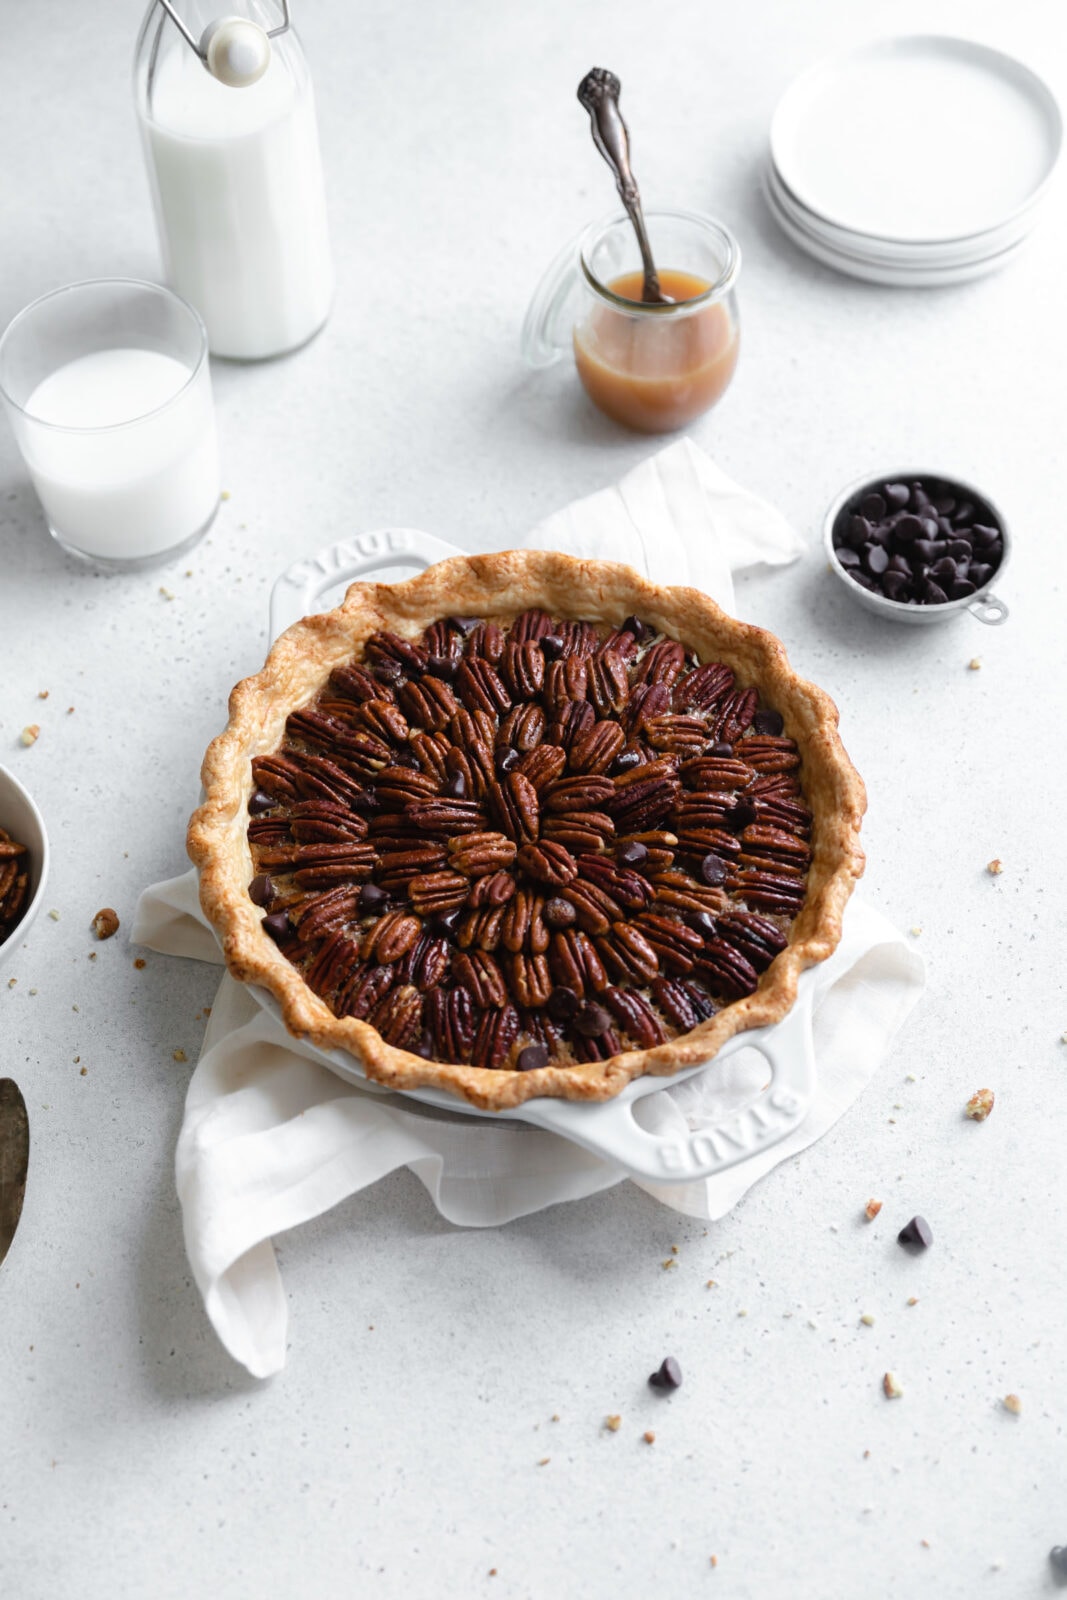 turtle pecan pie with caramel and chocolate